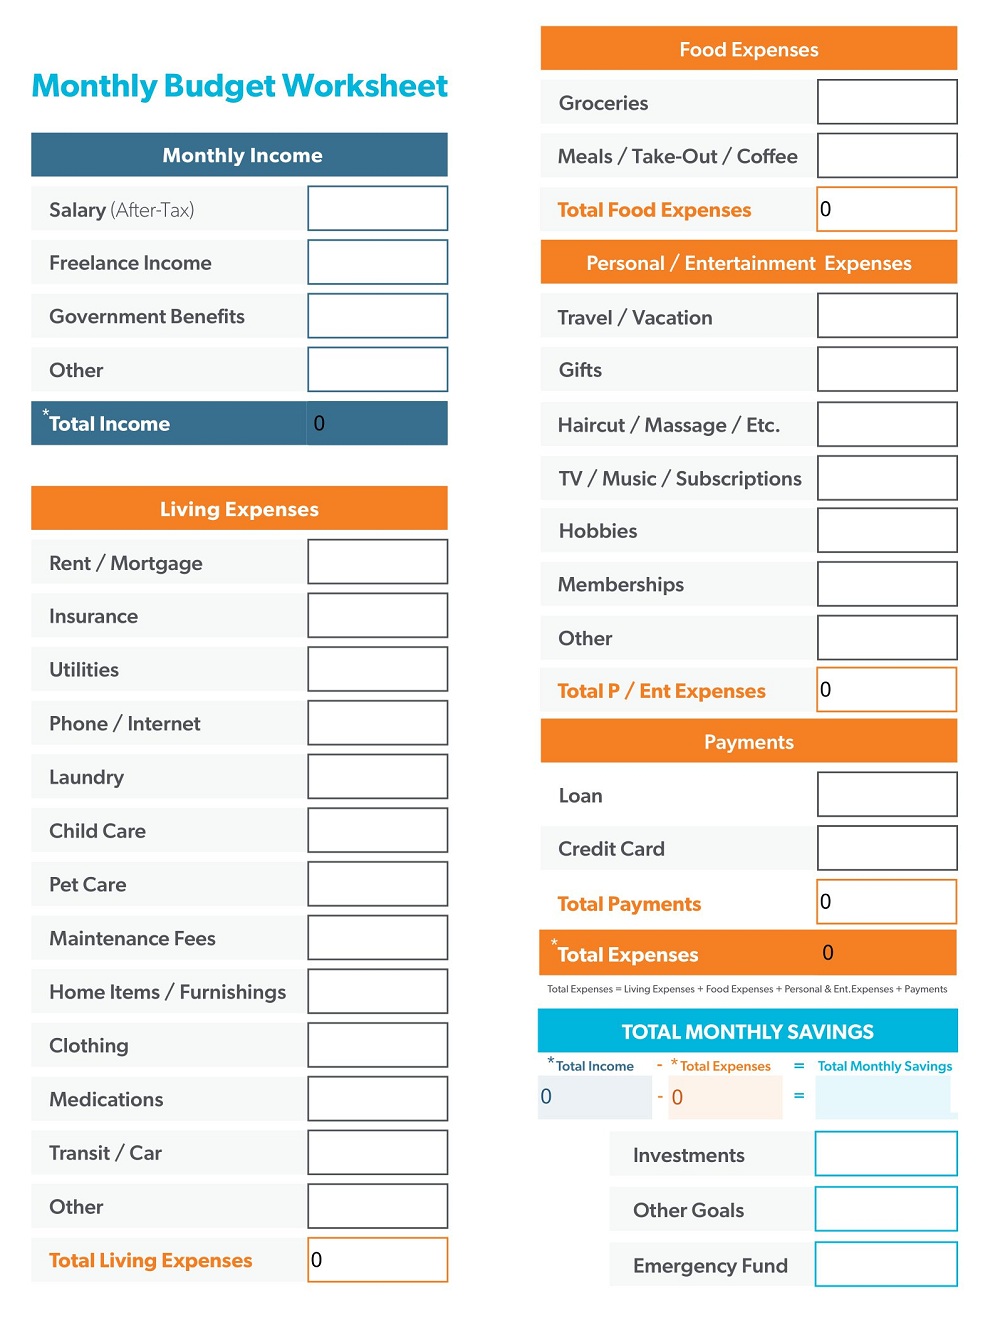 Monthly Food Budget Worksheet Template